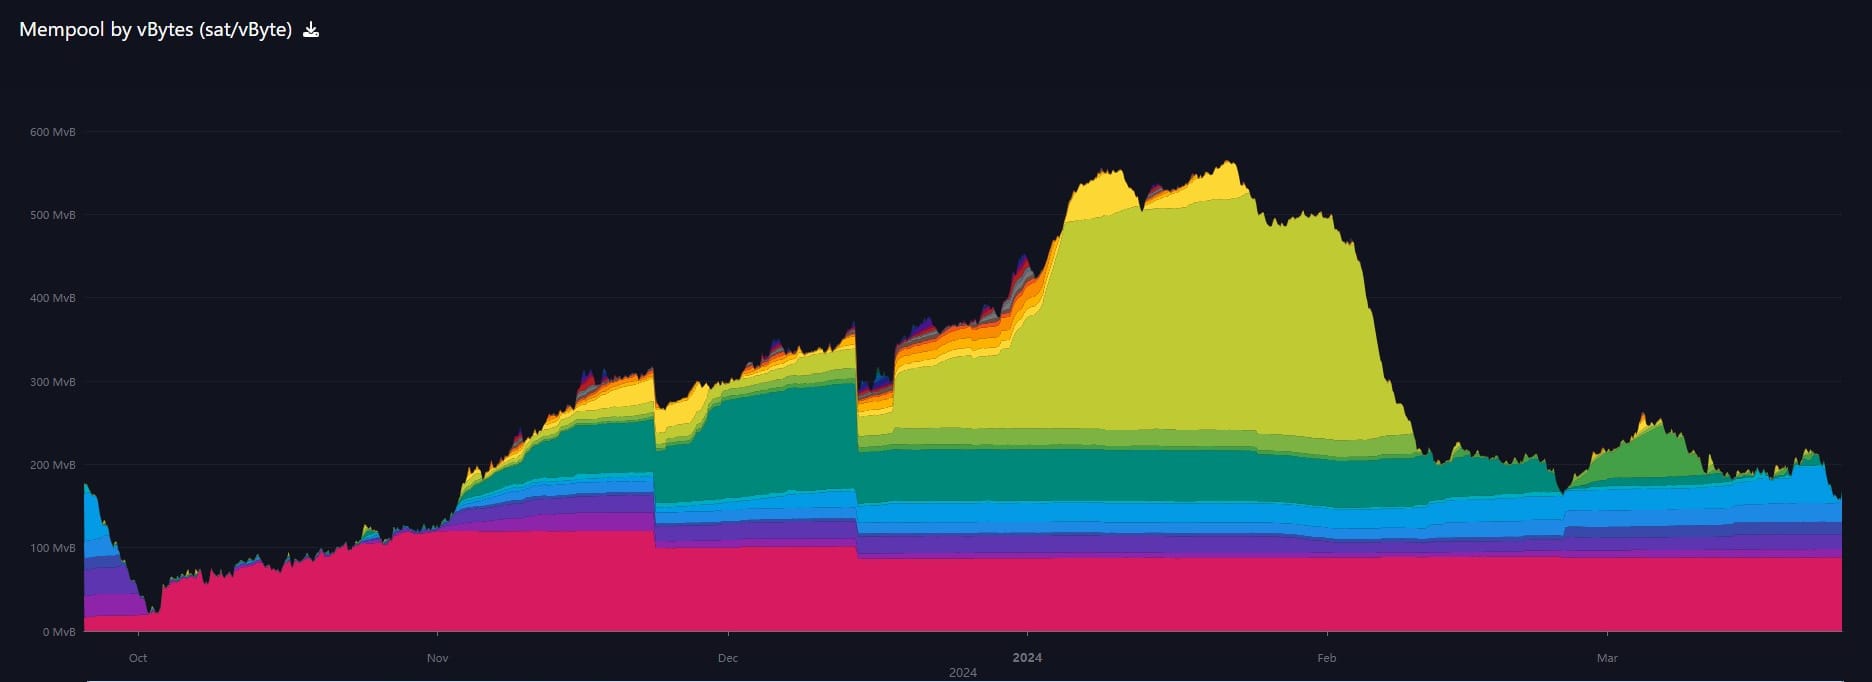 6-month chart of mempool, mempool.space